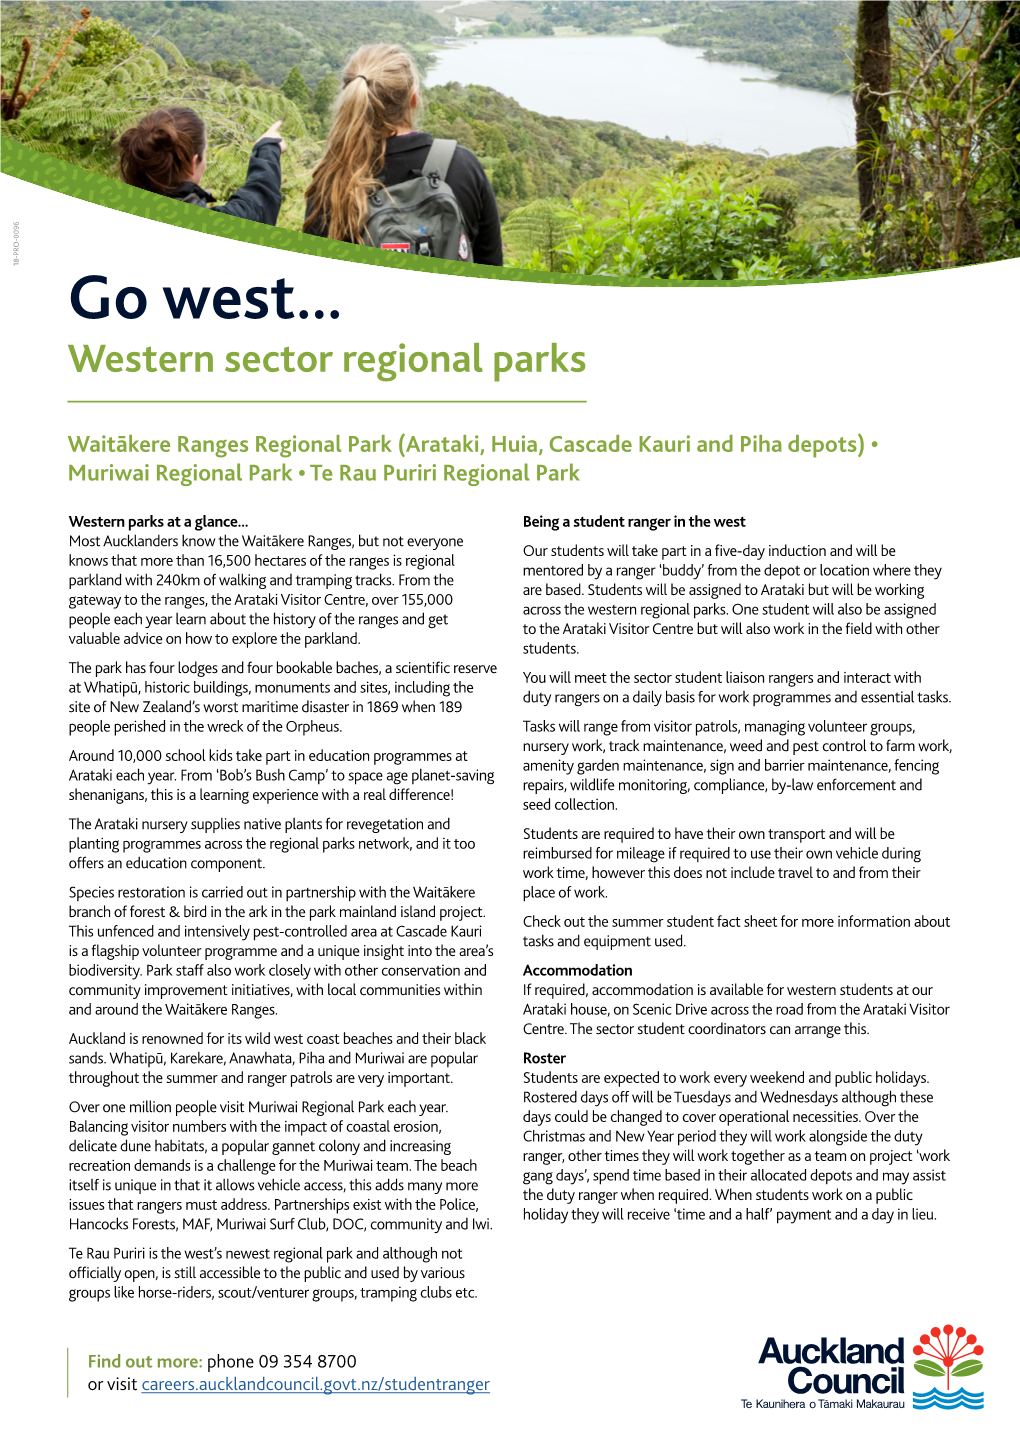 Go West... Western Sector Regional Parks